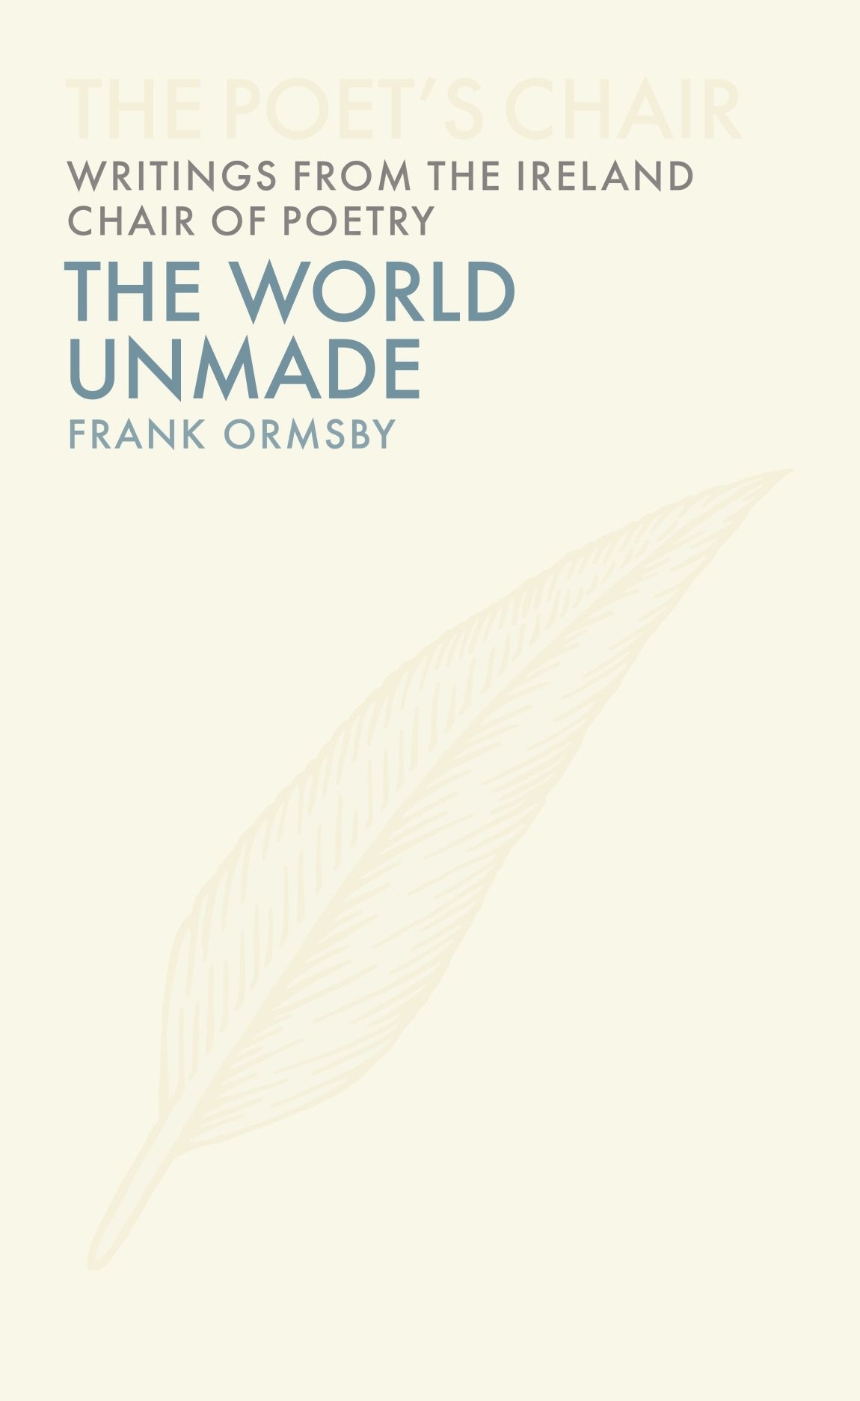 The World Unmade